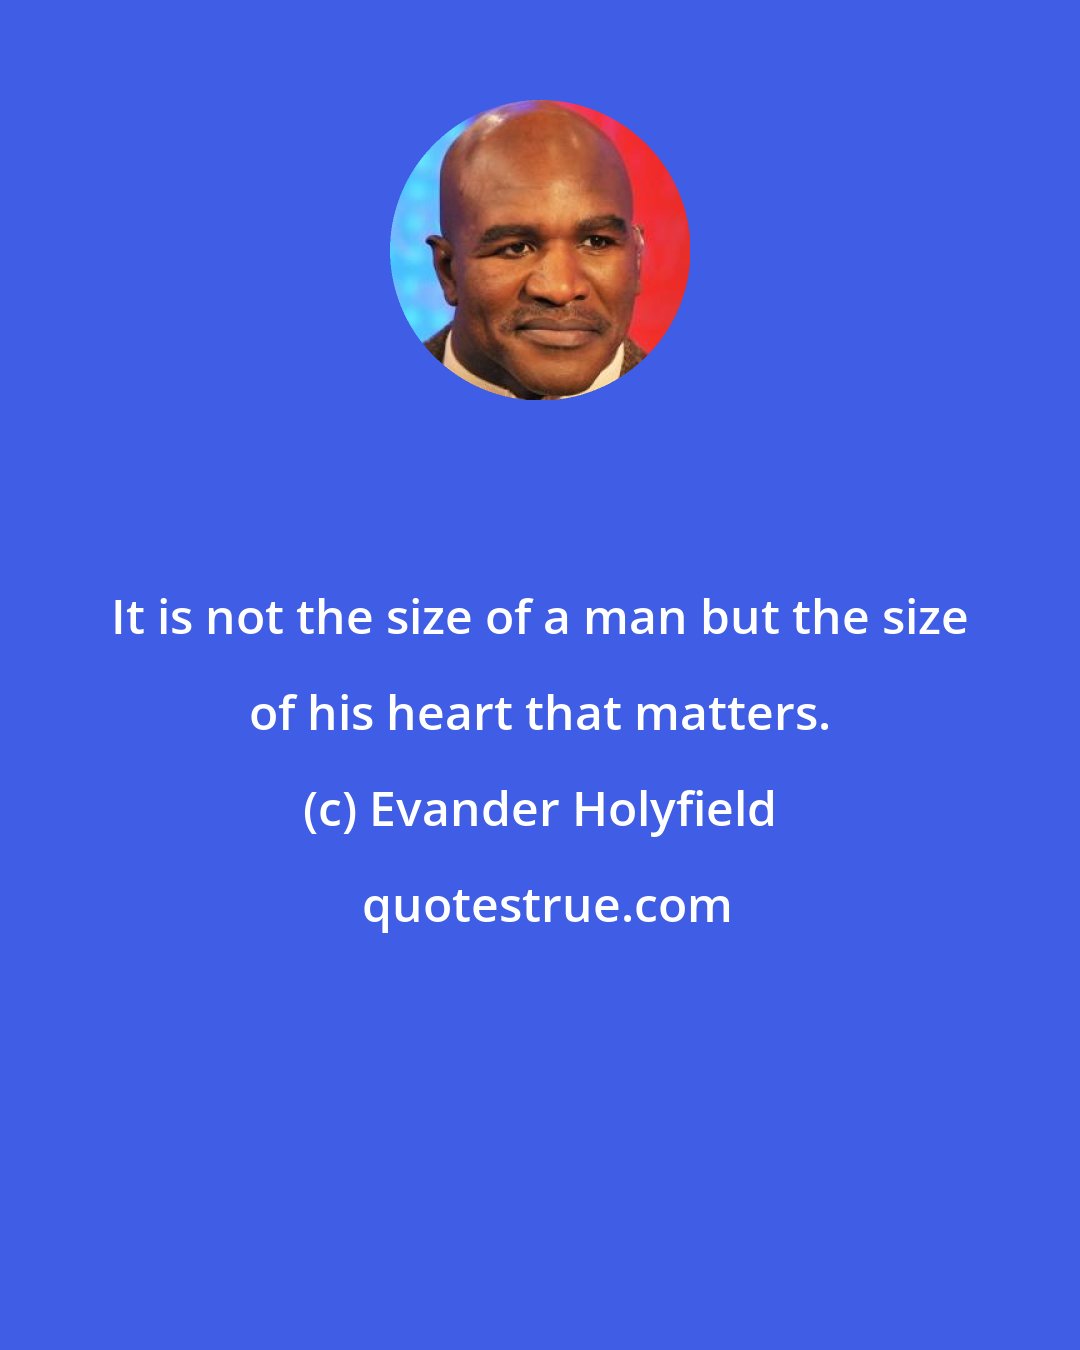 Evander Holyfield: It is not the size of a man but the size of his heart that matters.